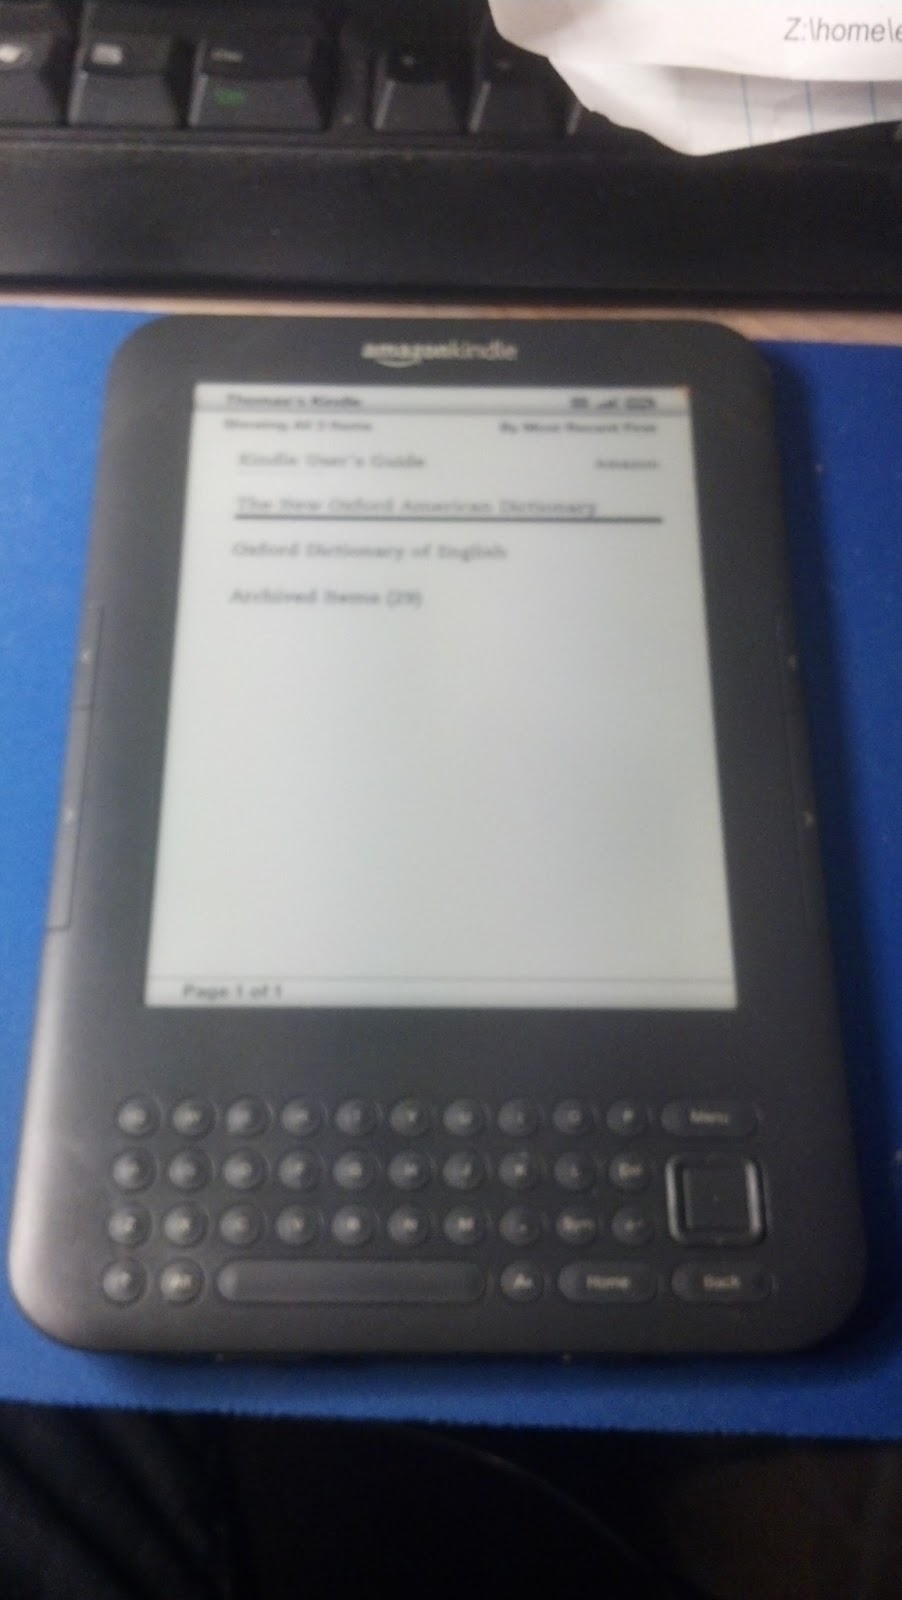 Siliconfish Repaired Kindle 3 Keyboard 3g That Was Freezing